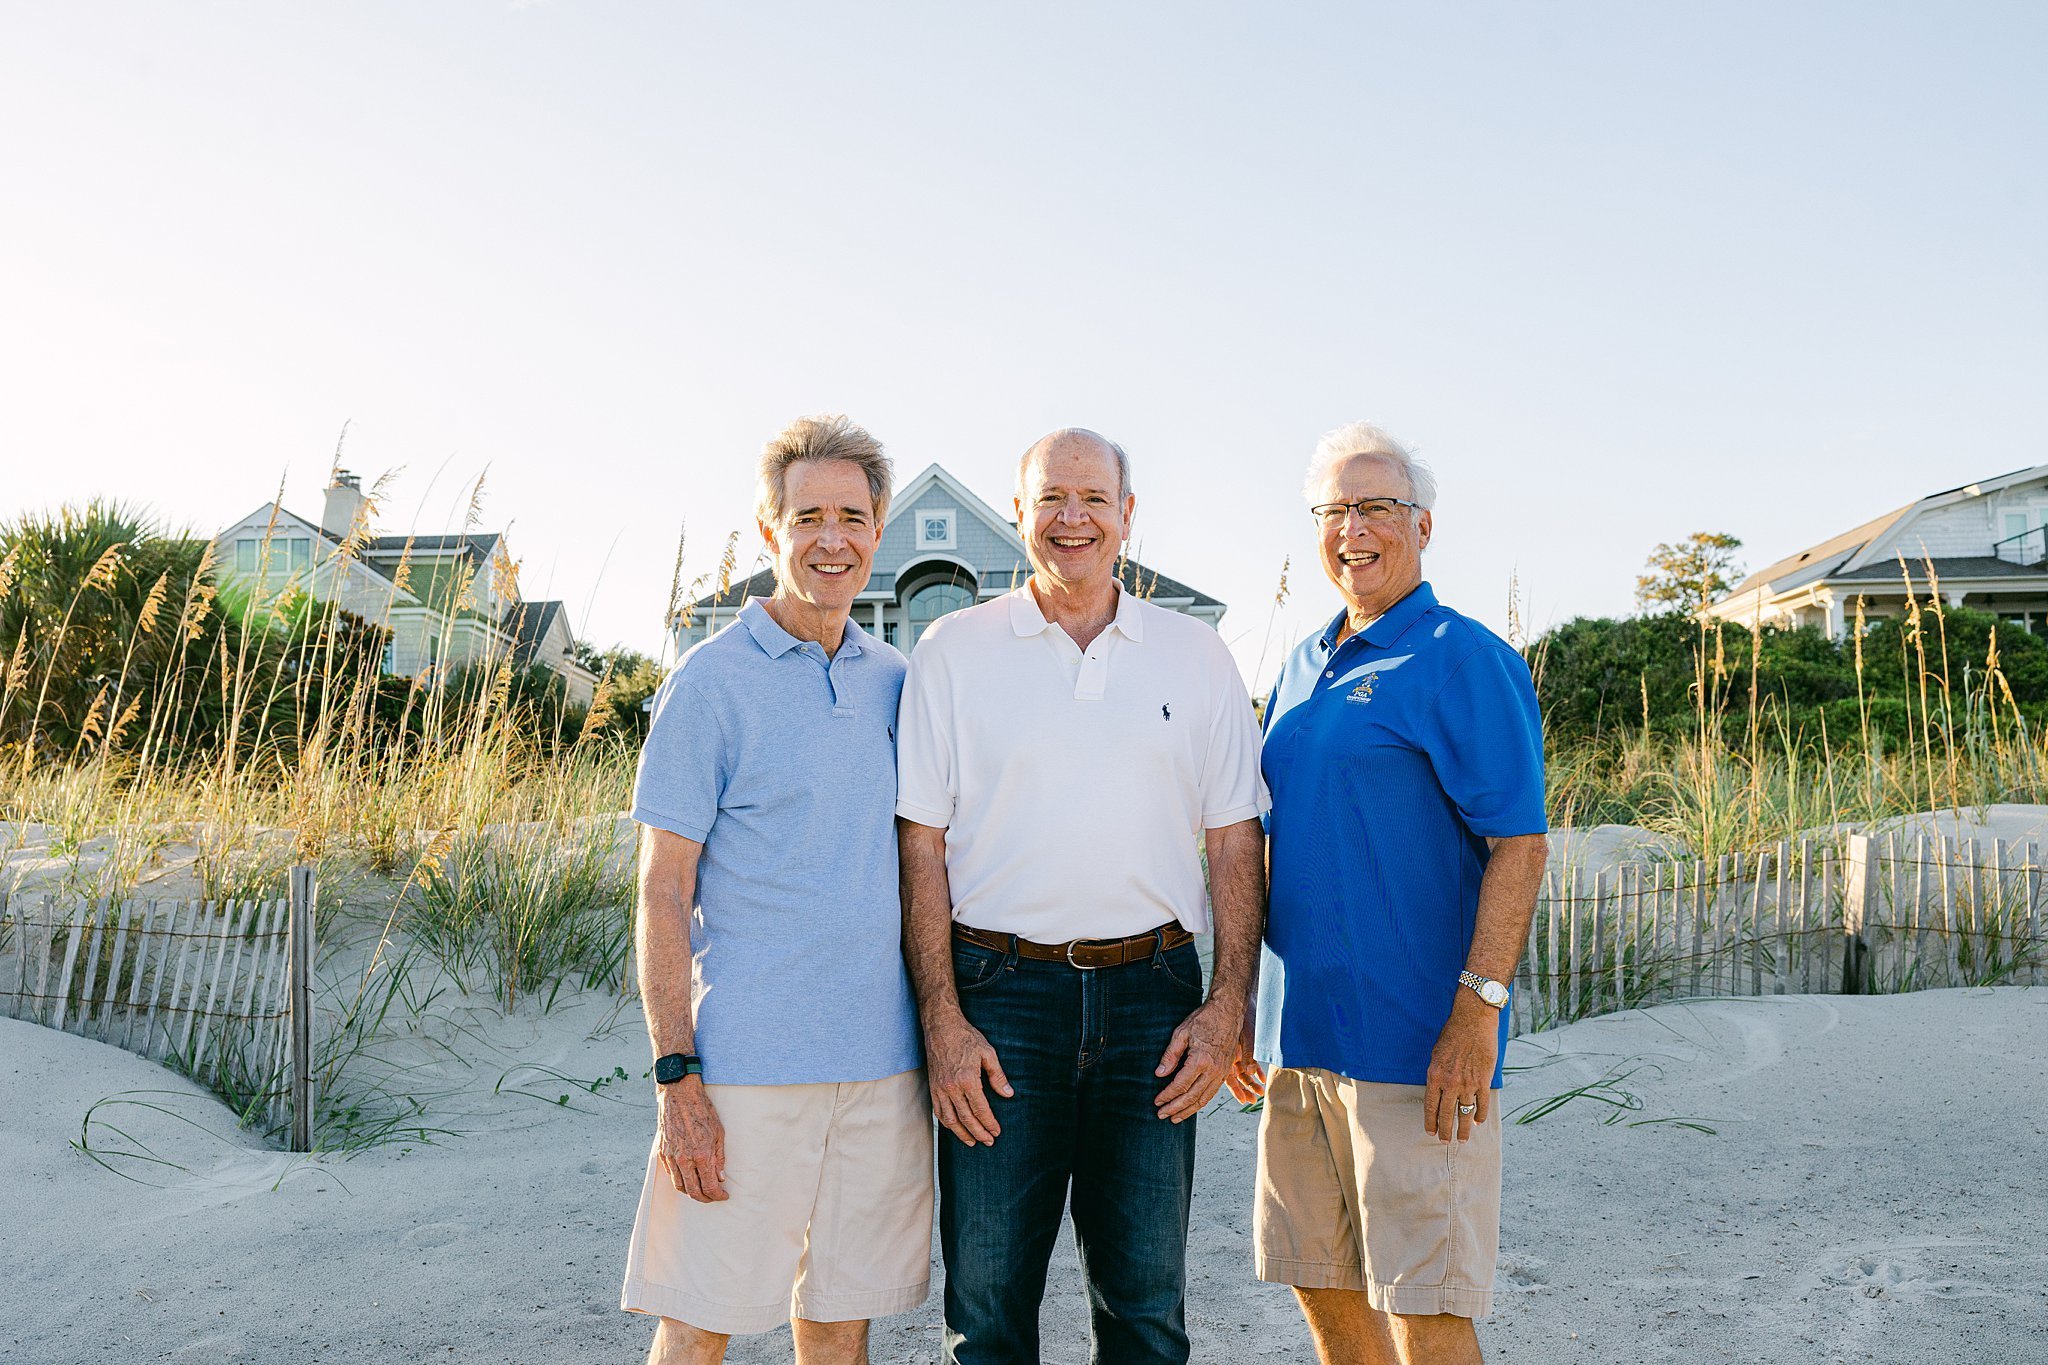 Katherine_Ives_Photography_Chod_Hilton_Head_Extended_Family_Session_88.JPG